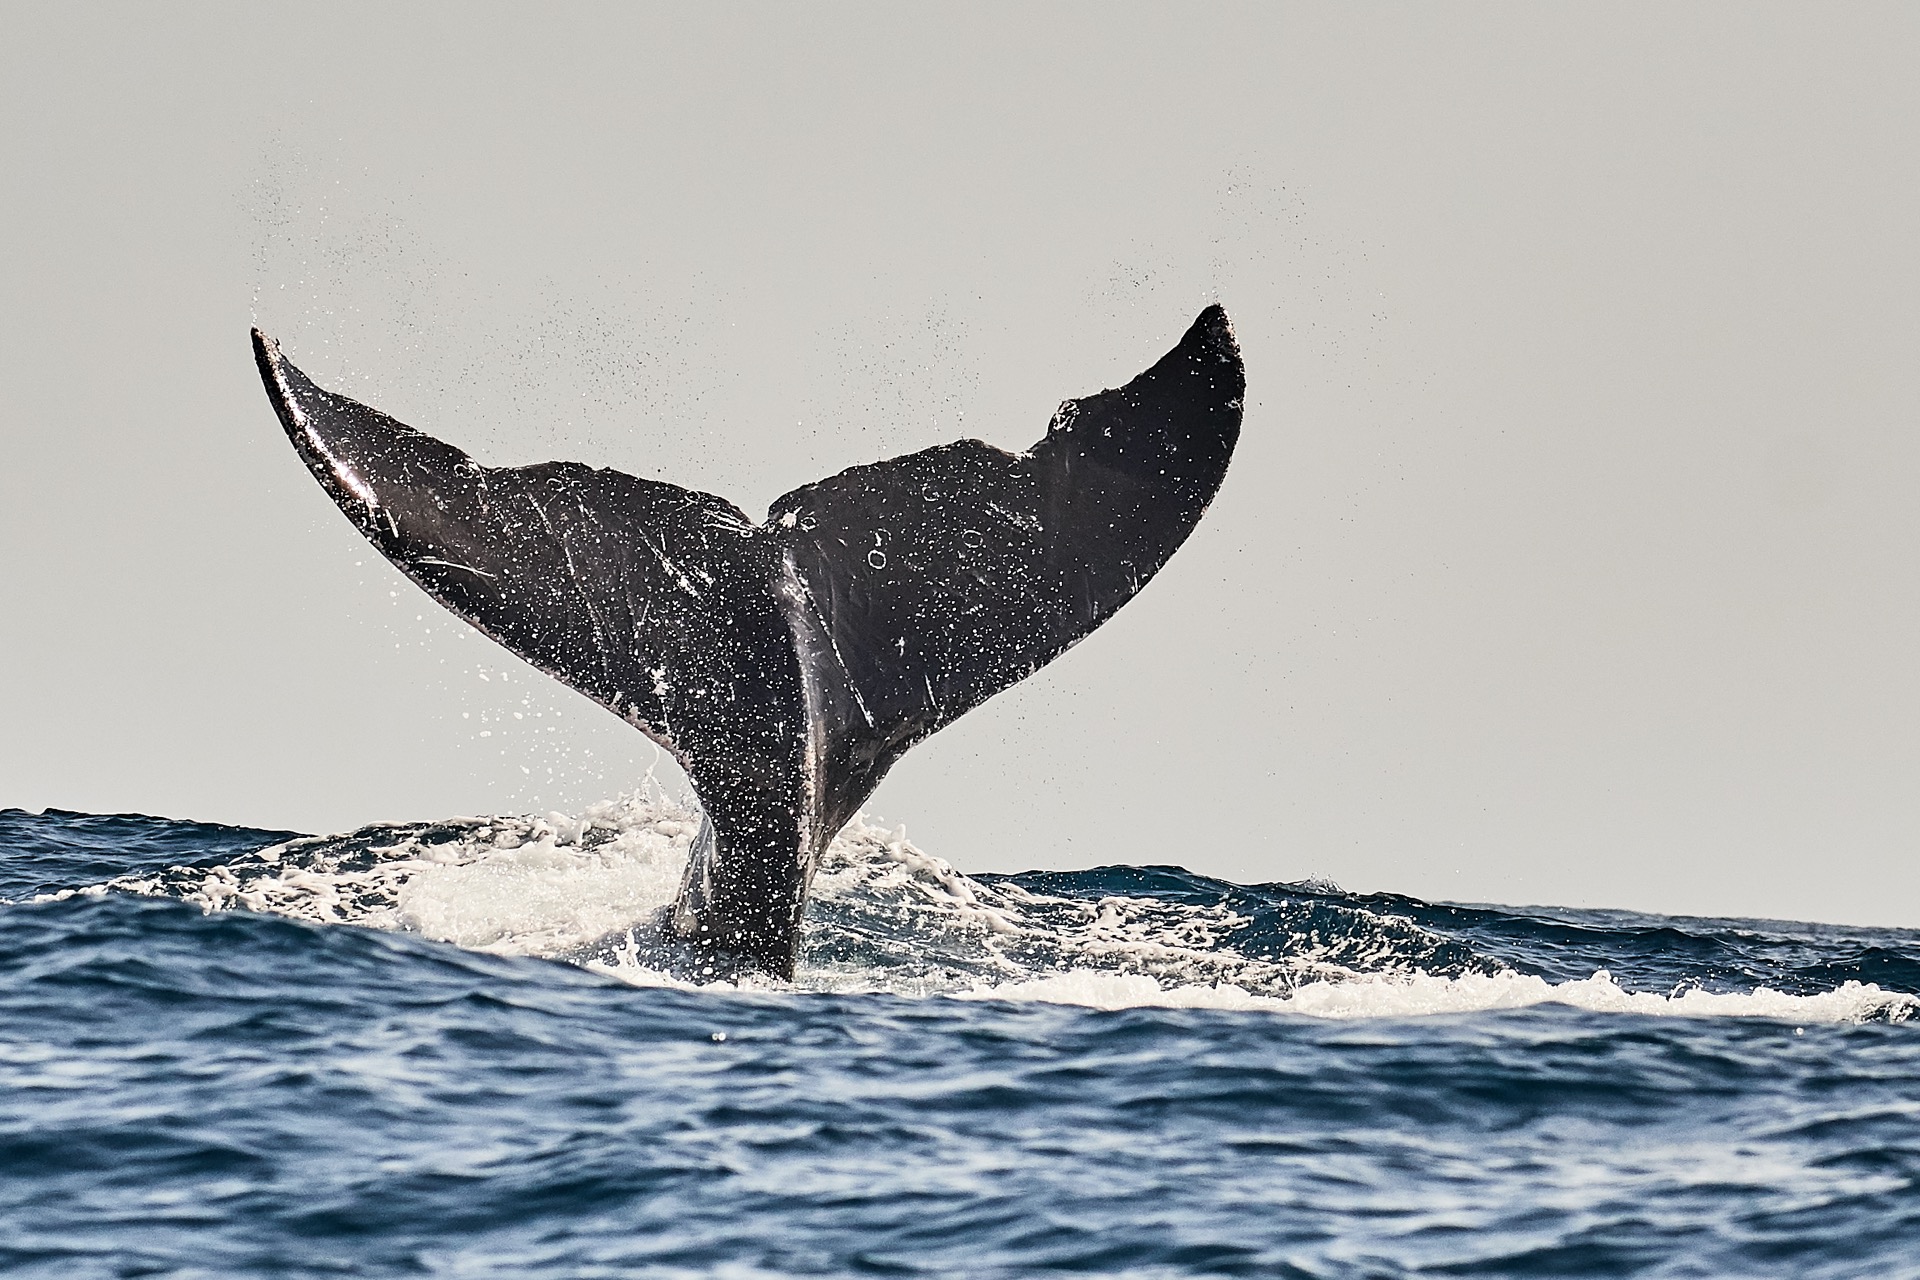 Eco-Friendly Whale Watching Puerto Escondido